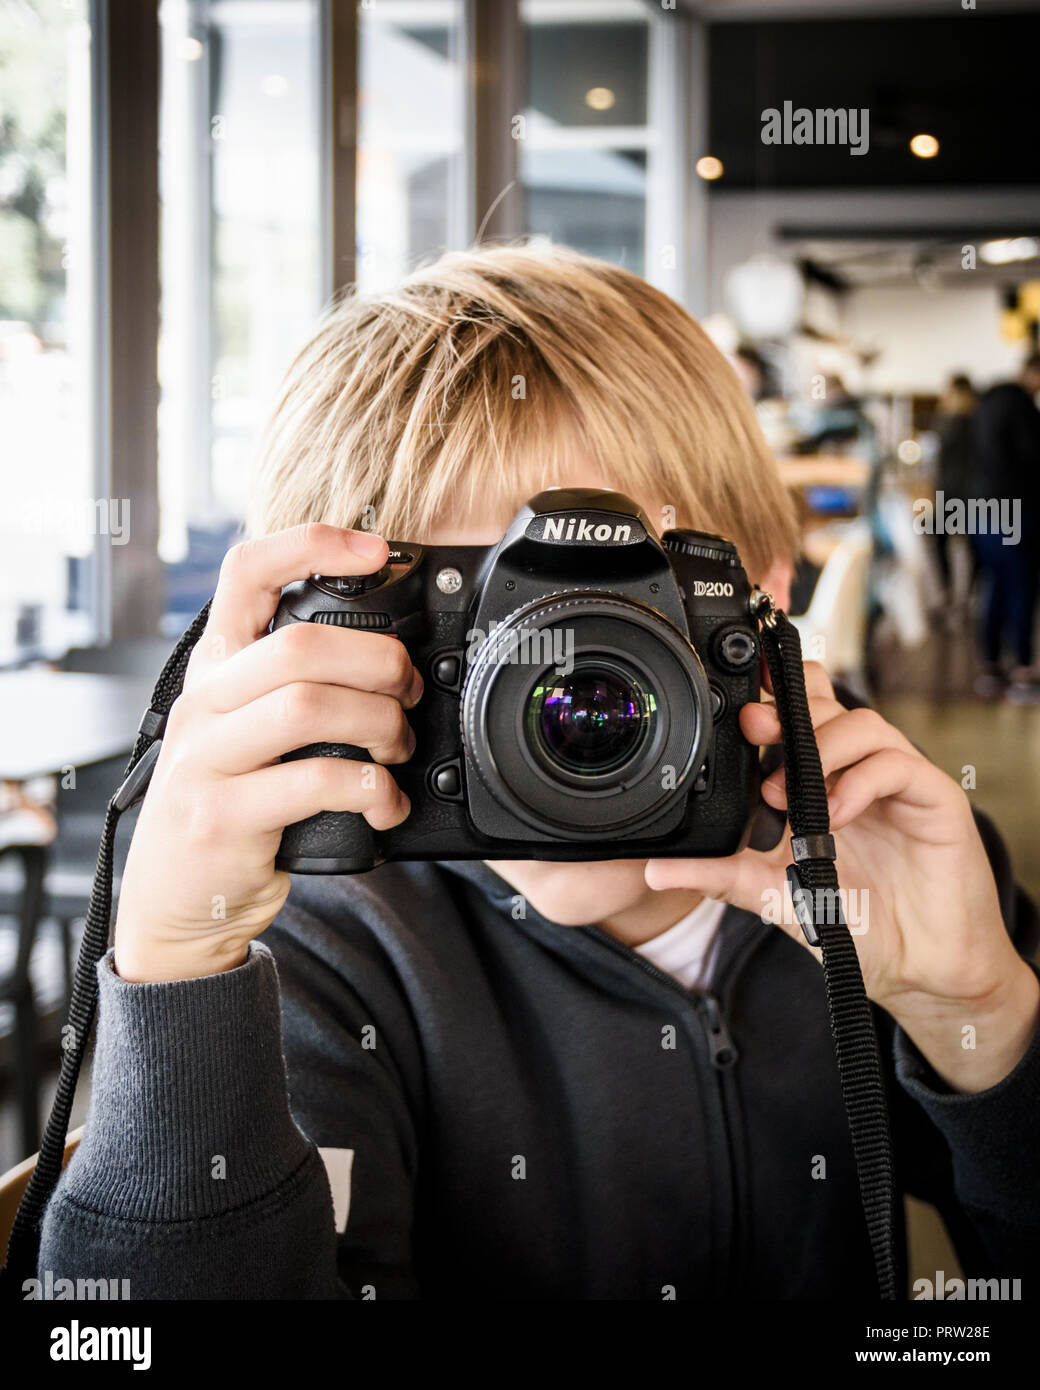 Young child with a DSLR camera Stock Photo